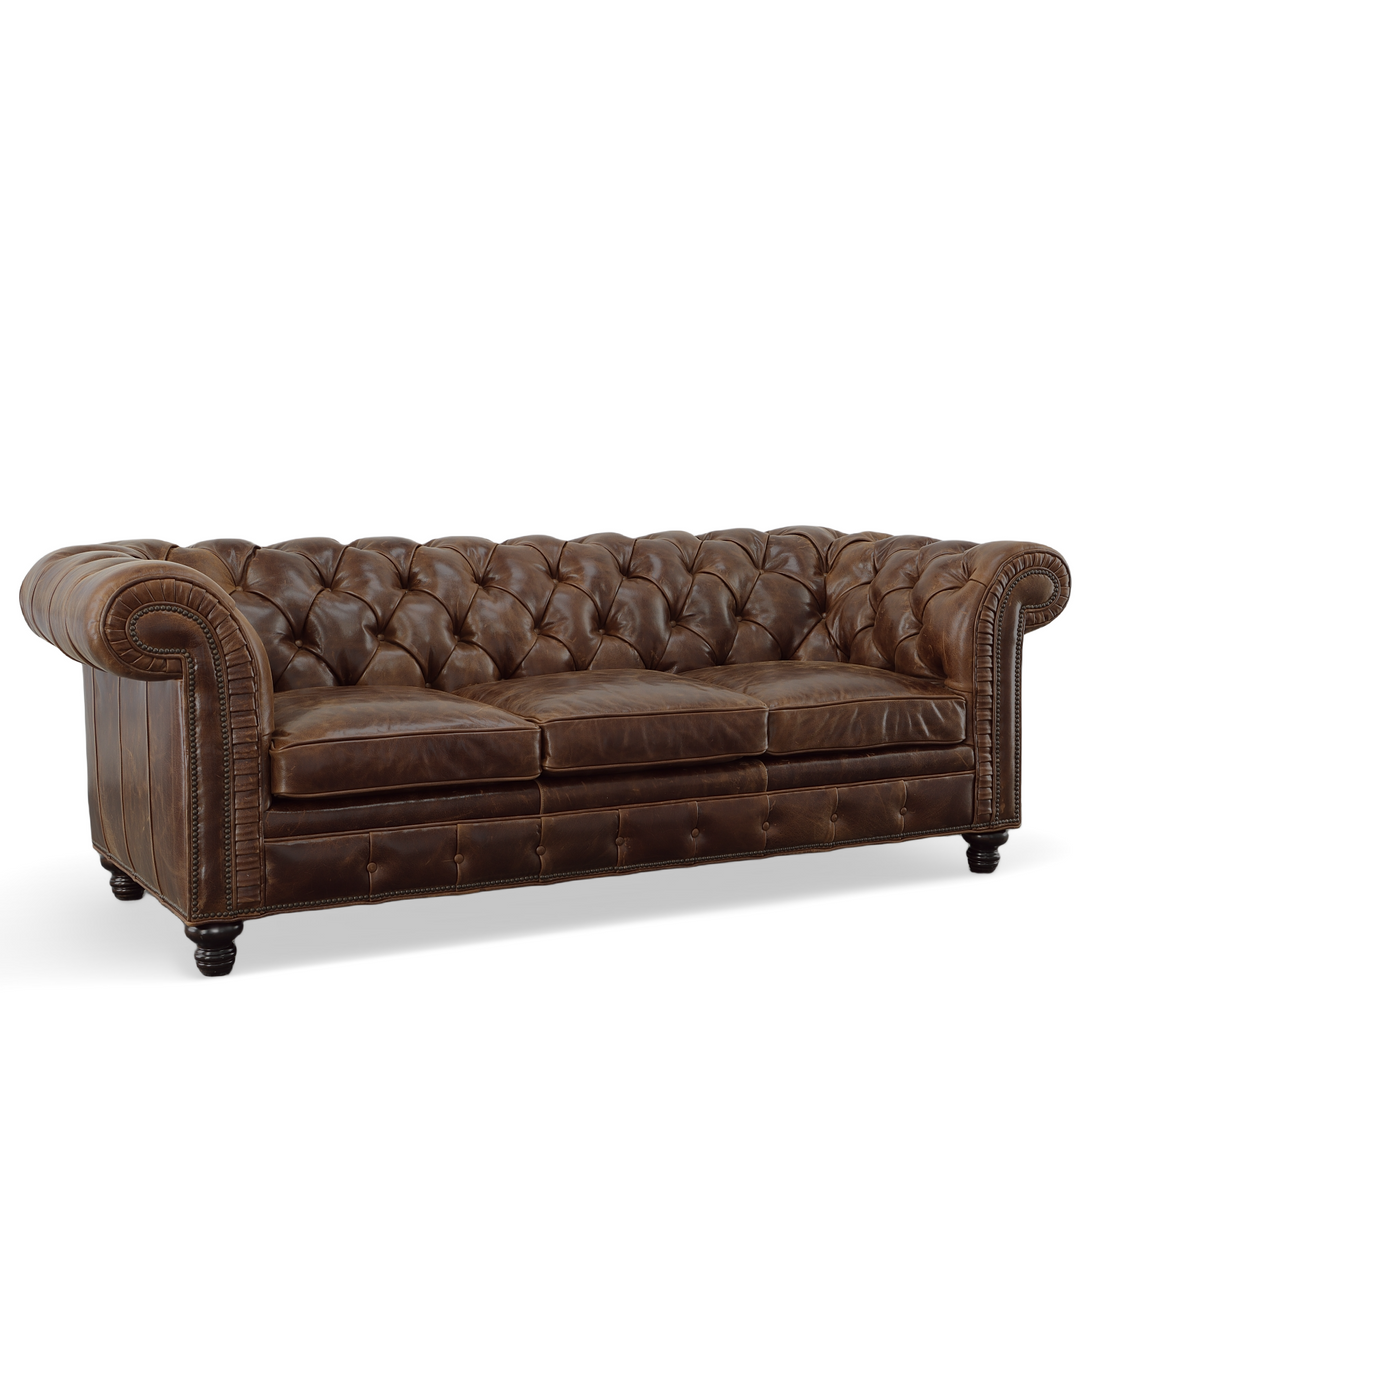 CCL Benedict Chesterfield Sofa